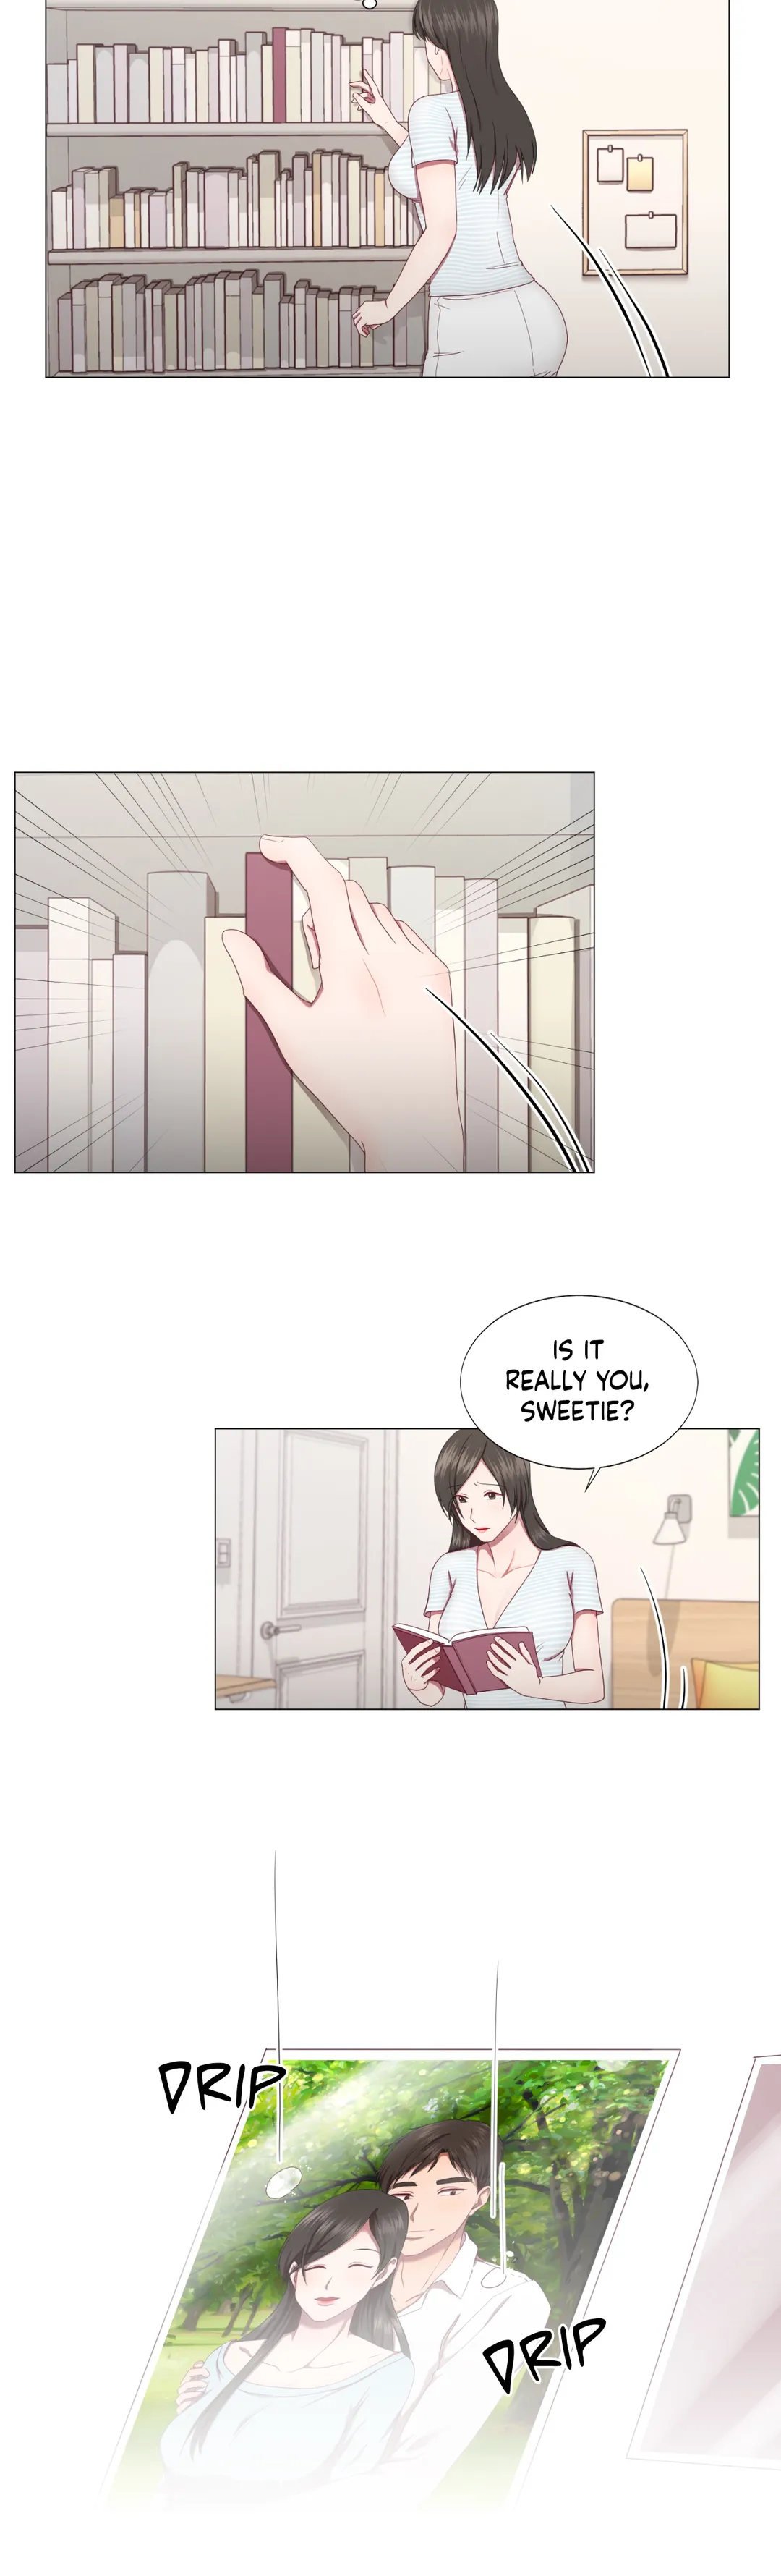 alive-and-swell-chap-3-23